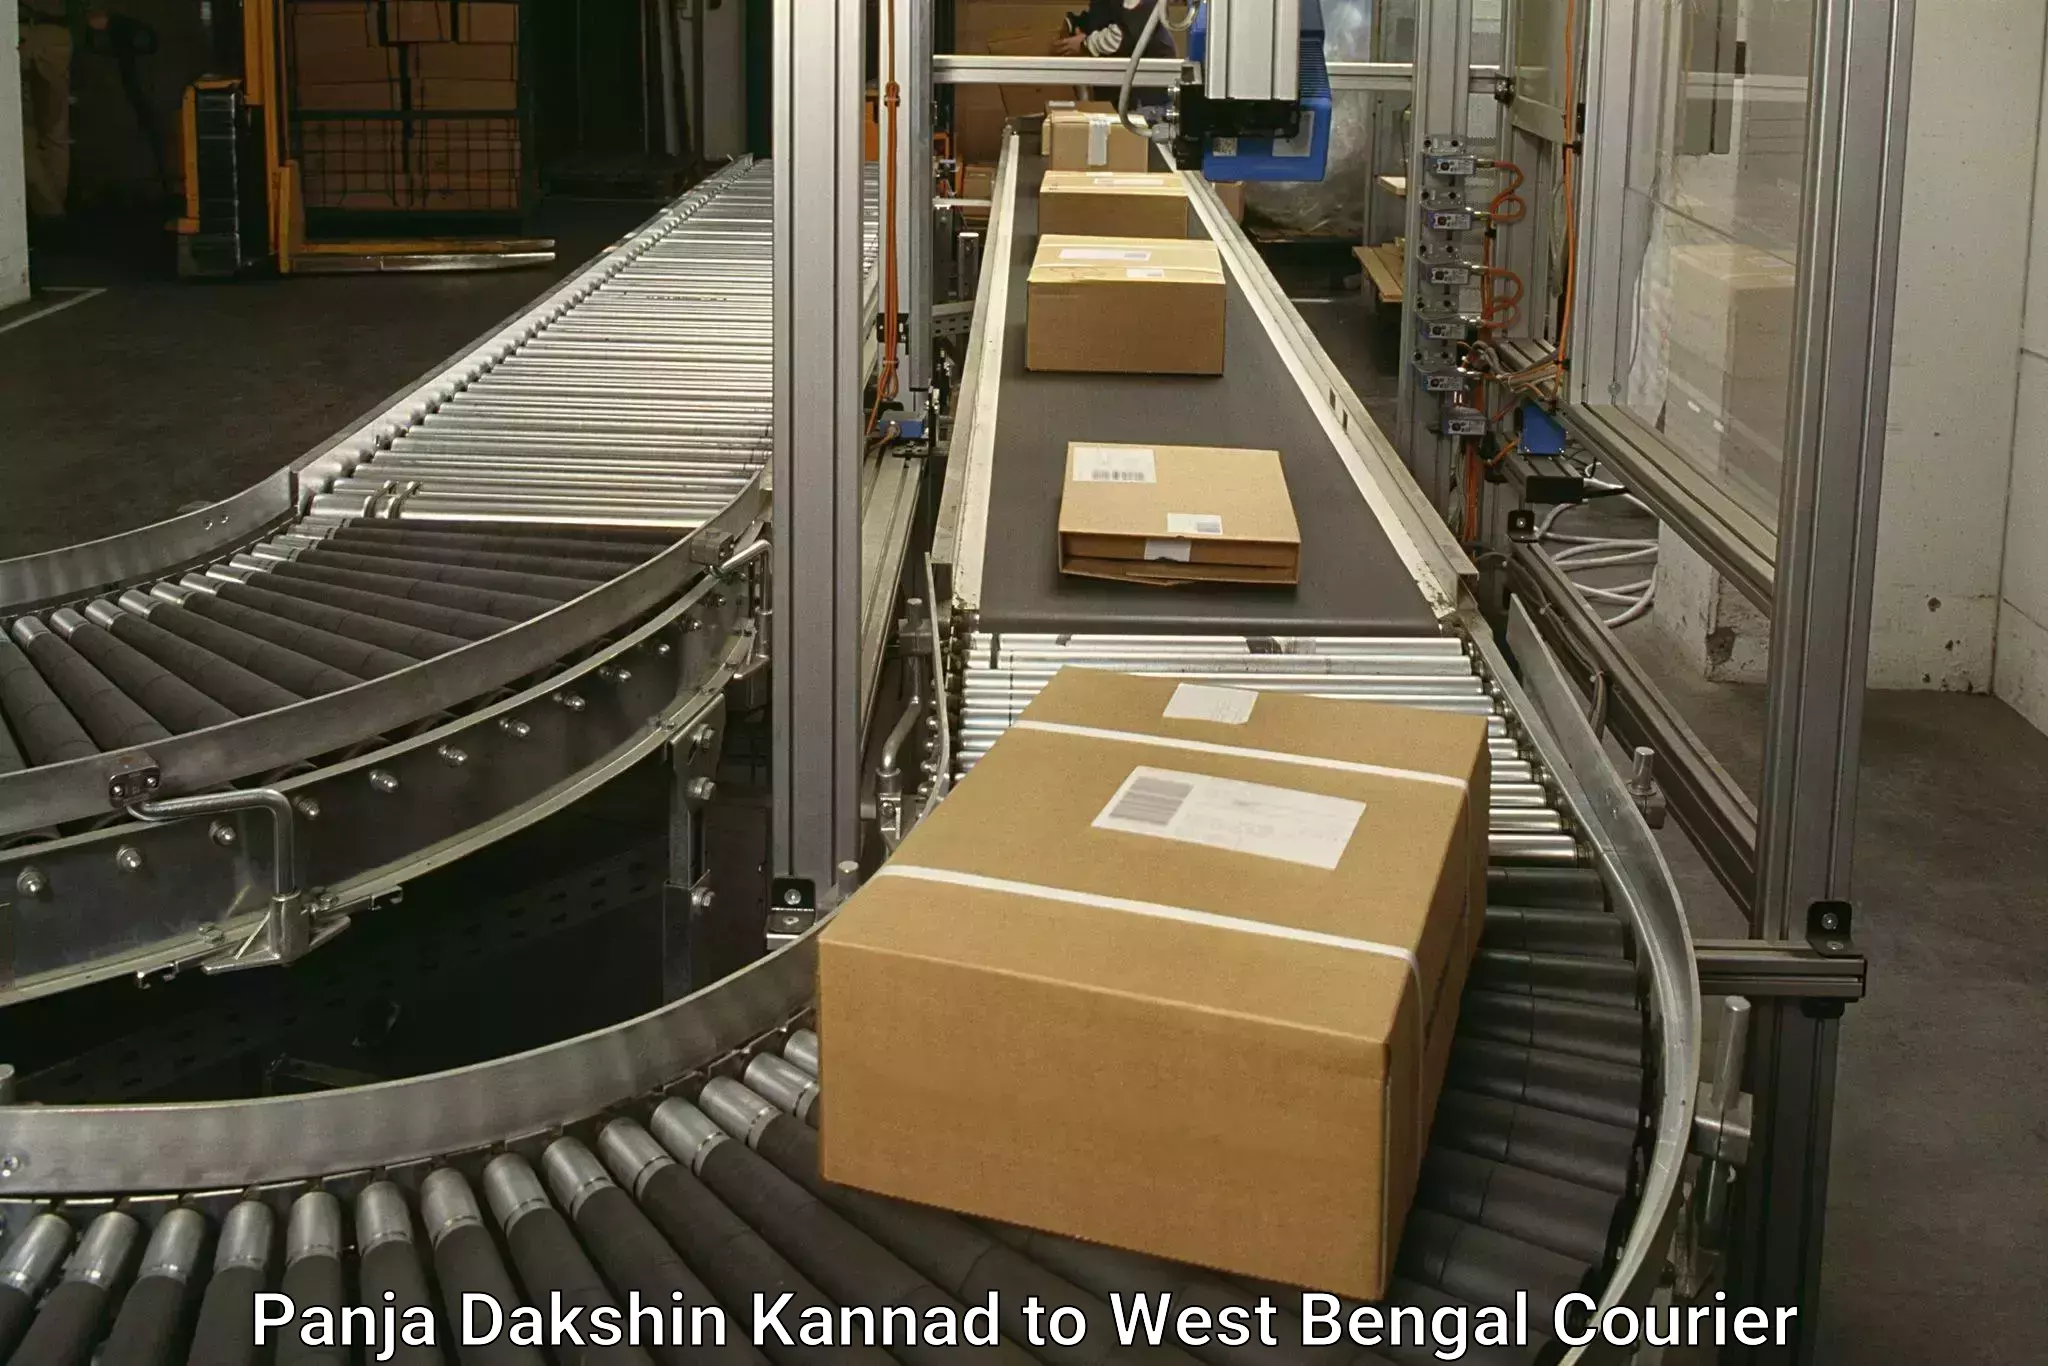 Cargo delivery service Panja Dakshin Kannad to West Bengal